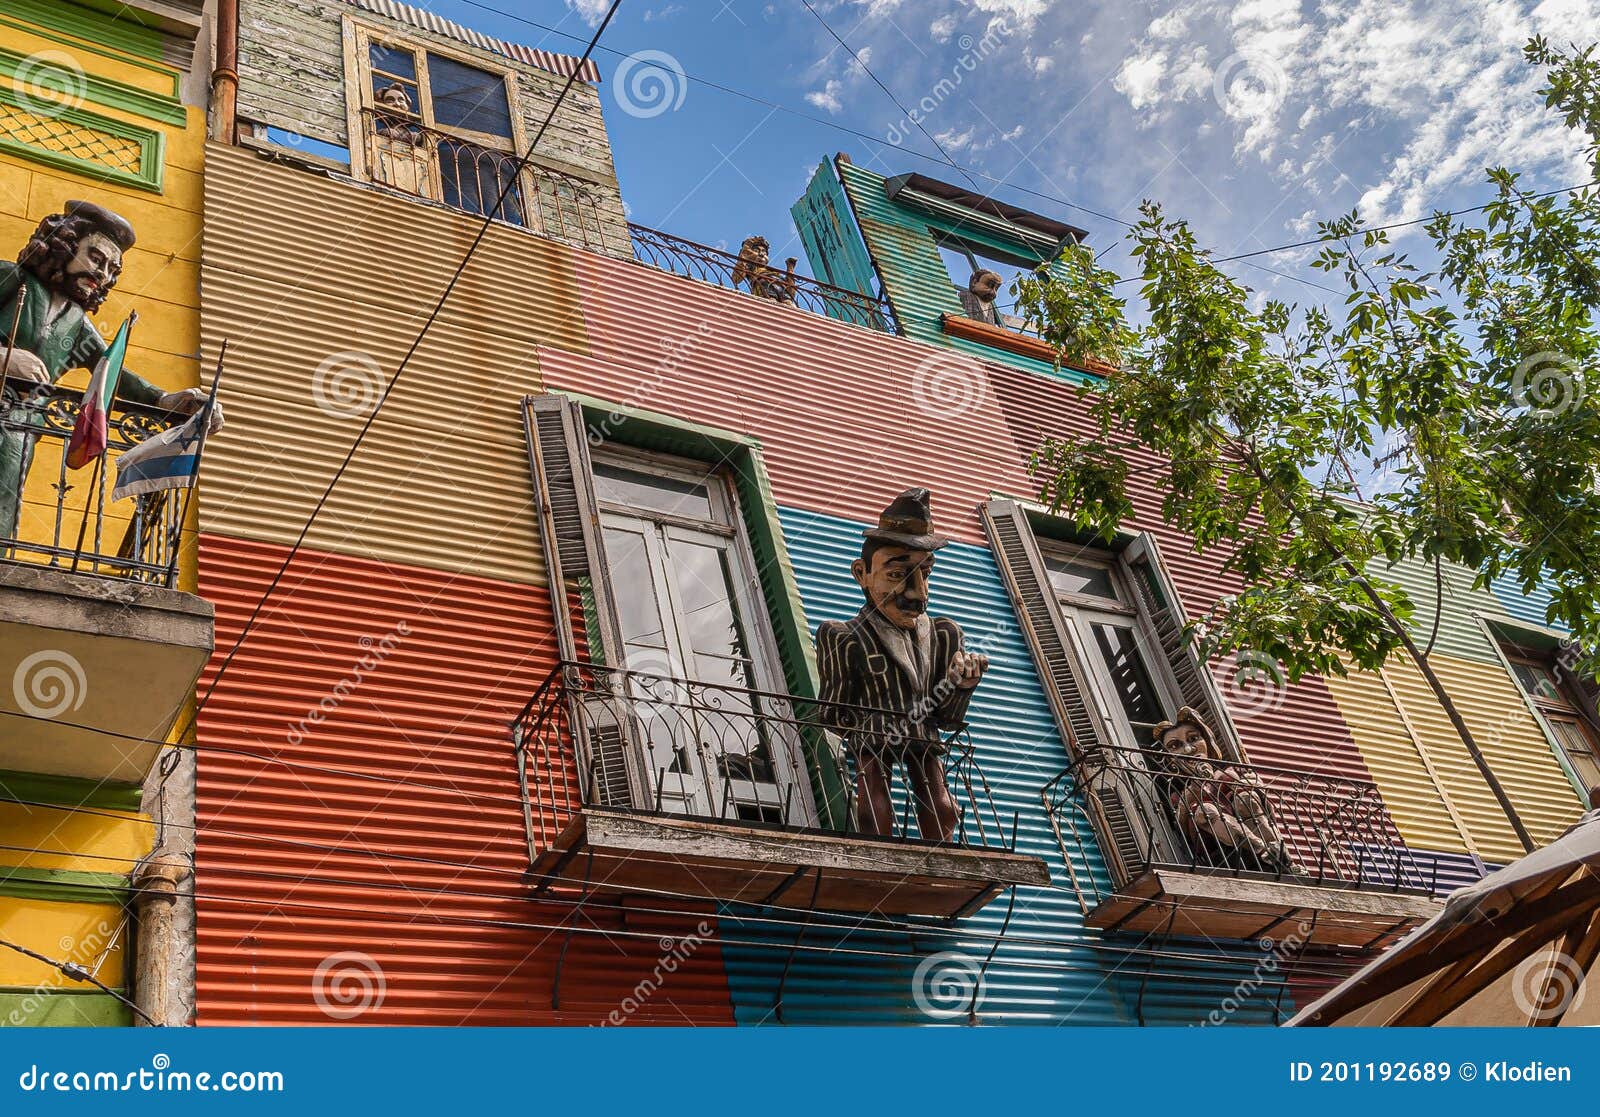 Life-size Human Dolls Looking into Street in La Boca, Buenos Aires,  Argentina Editorial Stock Image - Image of balcony, plata: 201192689